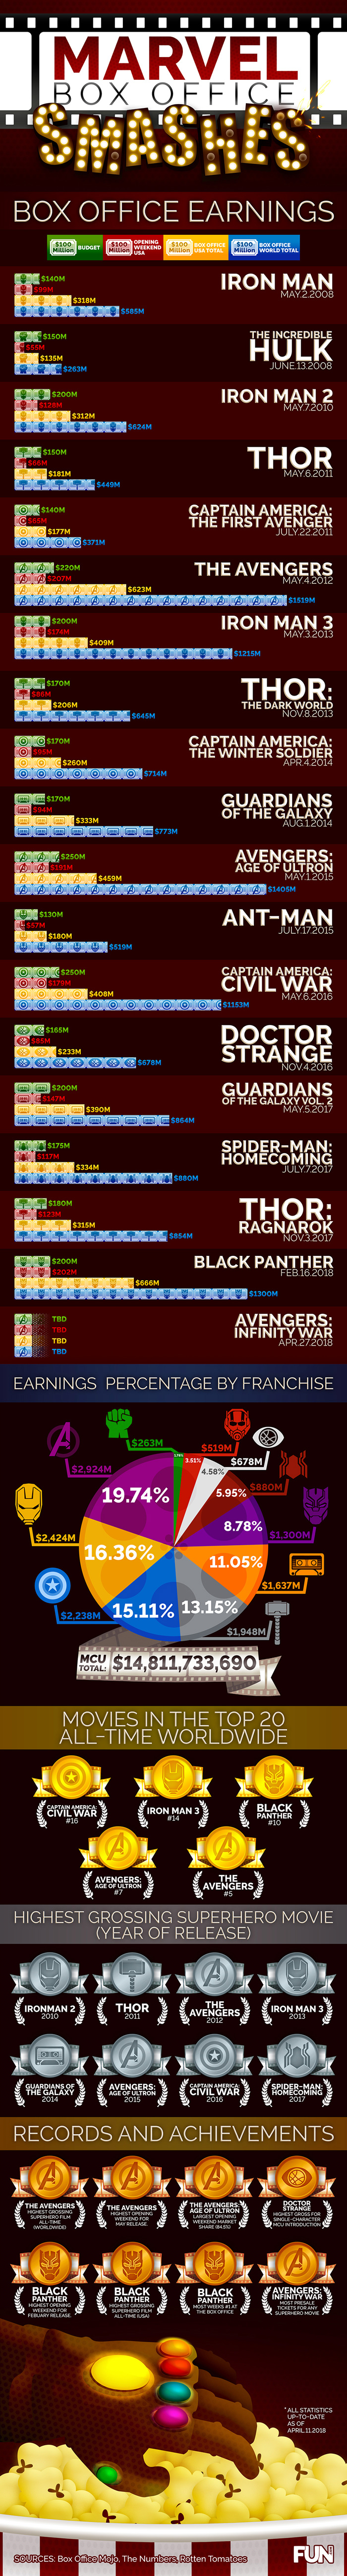 Box Office Smashes: The Marvel Cinematic Universe 